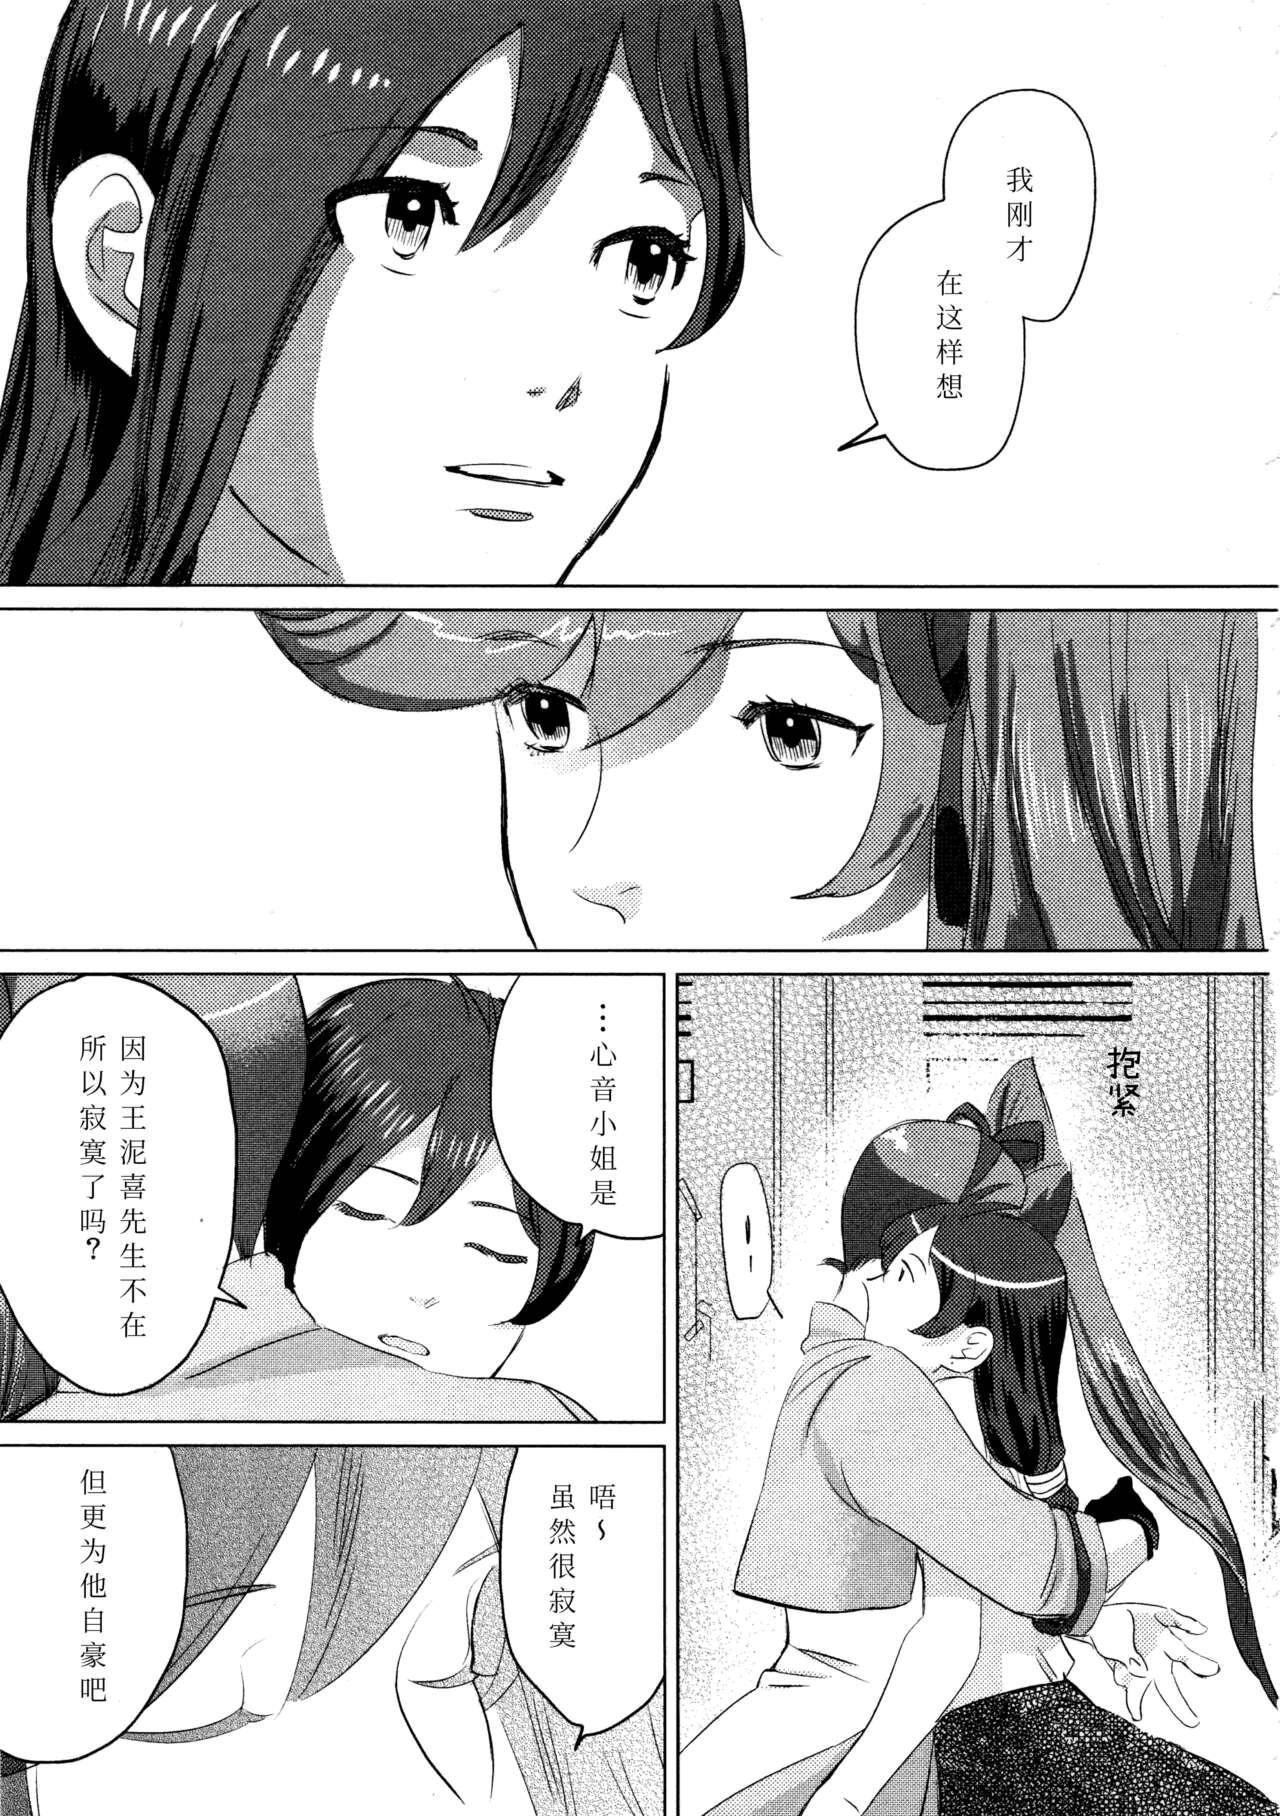 Dutch Don't leave me alone,my big LITTLE brother - Ace attorney | gyakuten saiban Asian Babes - Page 6